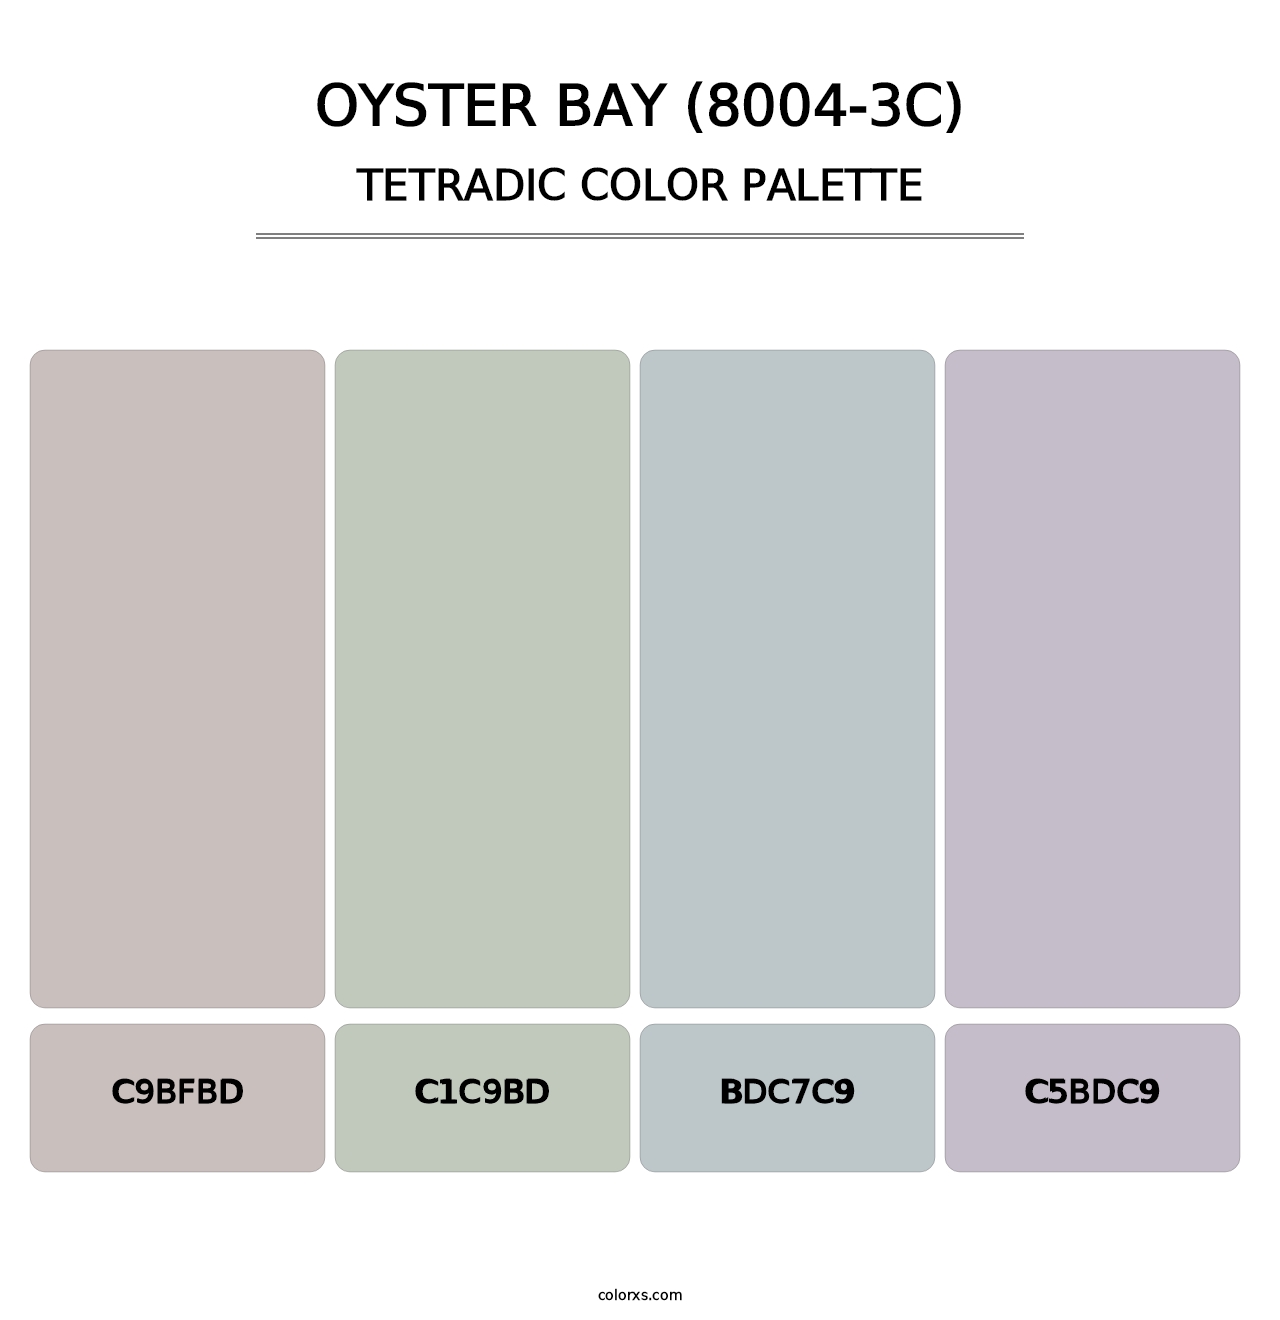 Oyster Bay (8004-3C) - Tetradic Color Palette